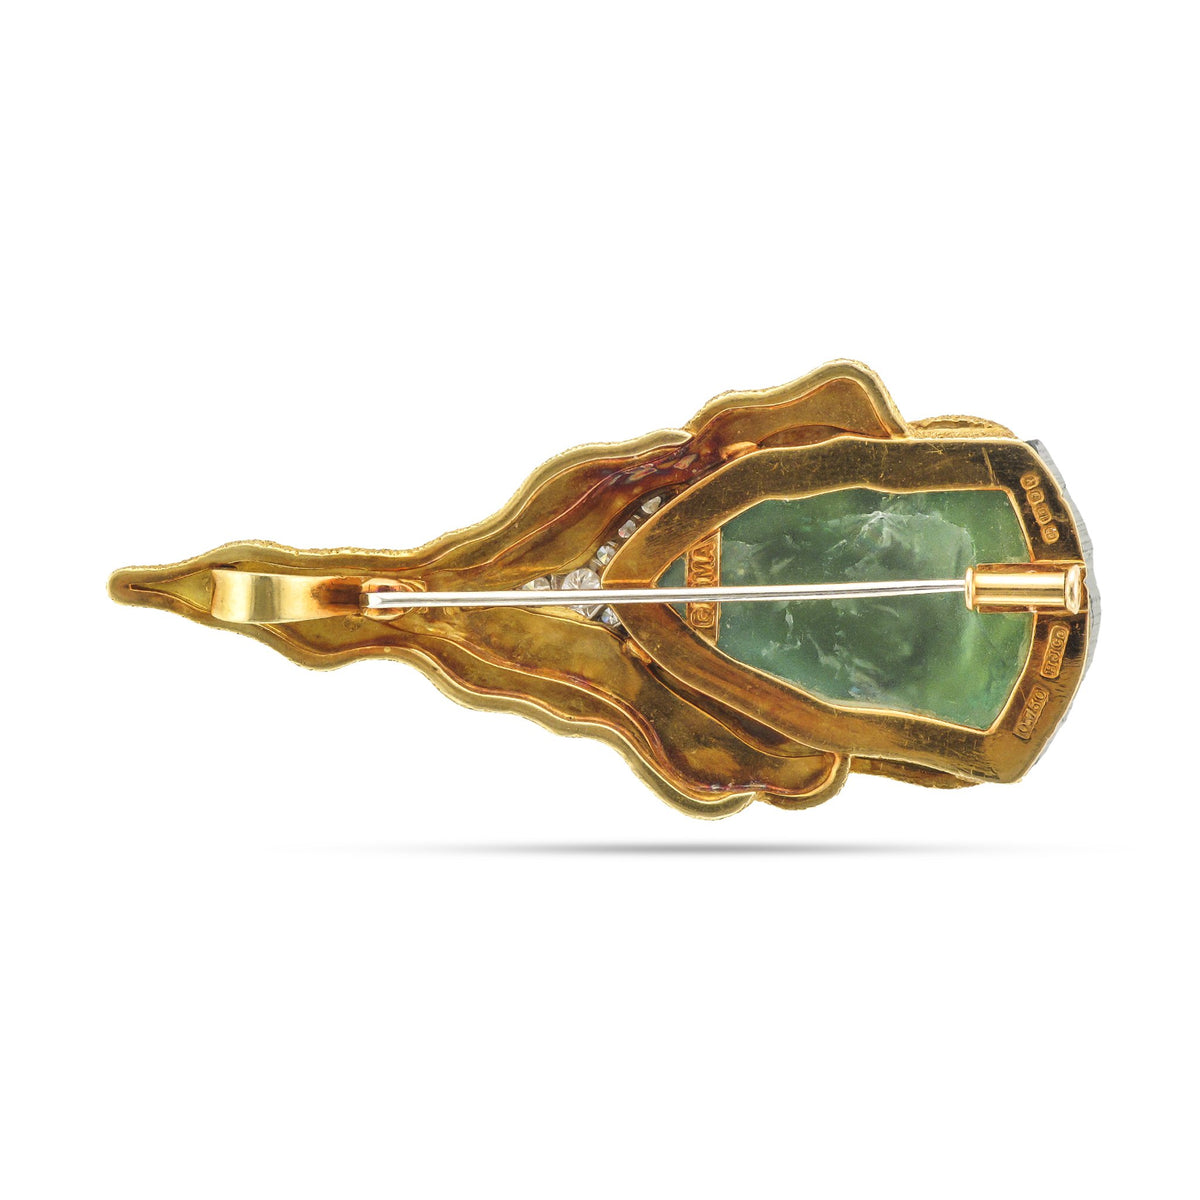 Vintage Andrew Grima 18ct Yellow Gold Tourmaline Brooch